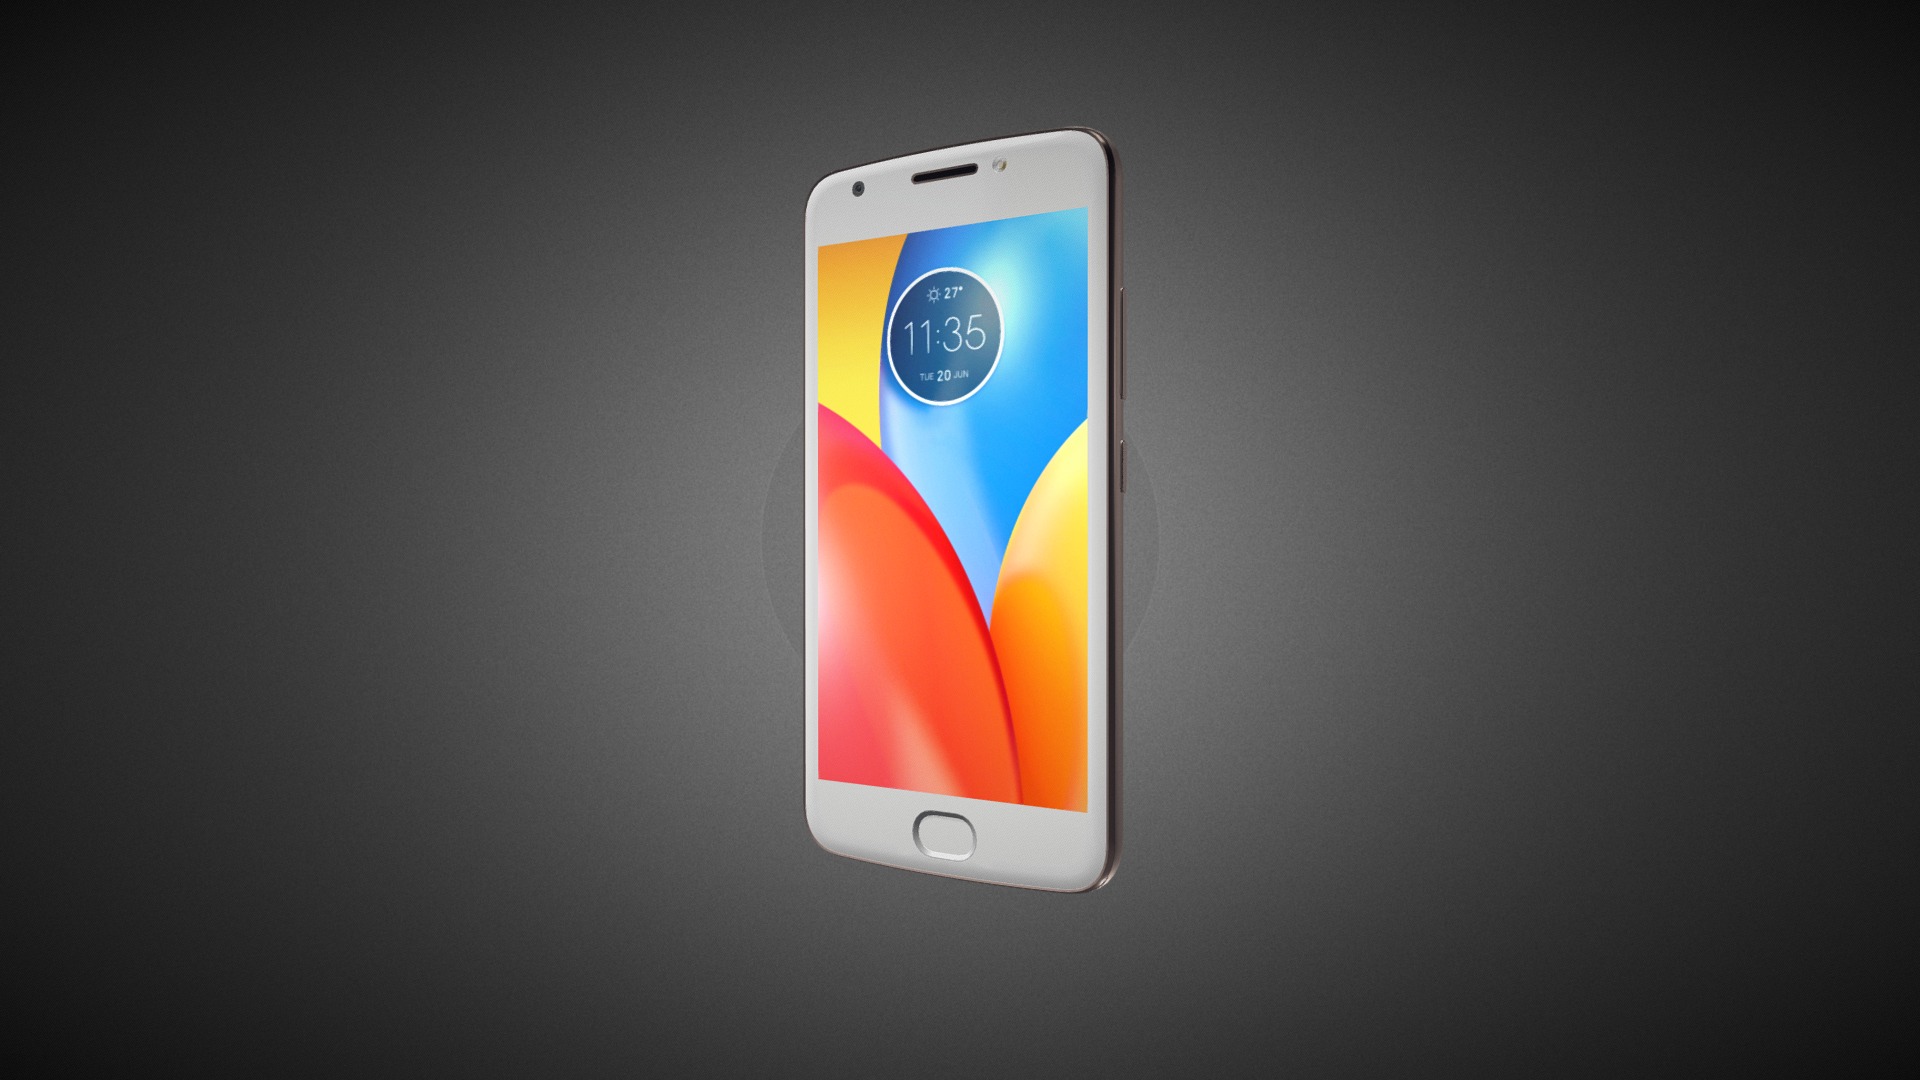 3D model Motorola Moto E4 for Element 3D - This is a 3D model of the Motorola Moto E4 for Element 3D. The 3D model is about a cell phone with a red and blue screen.